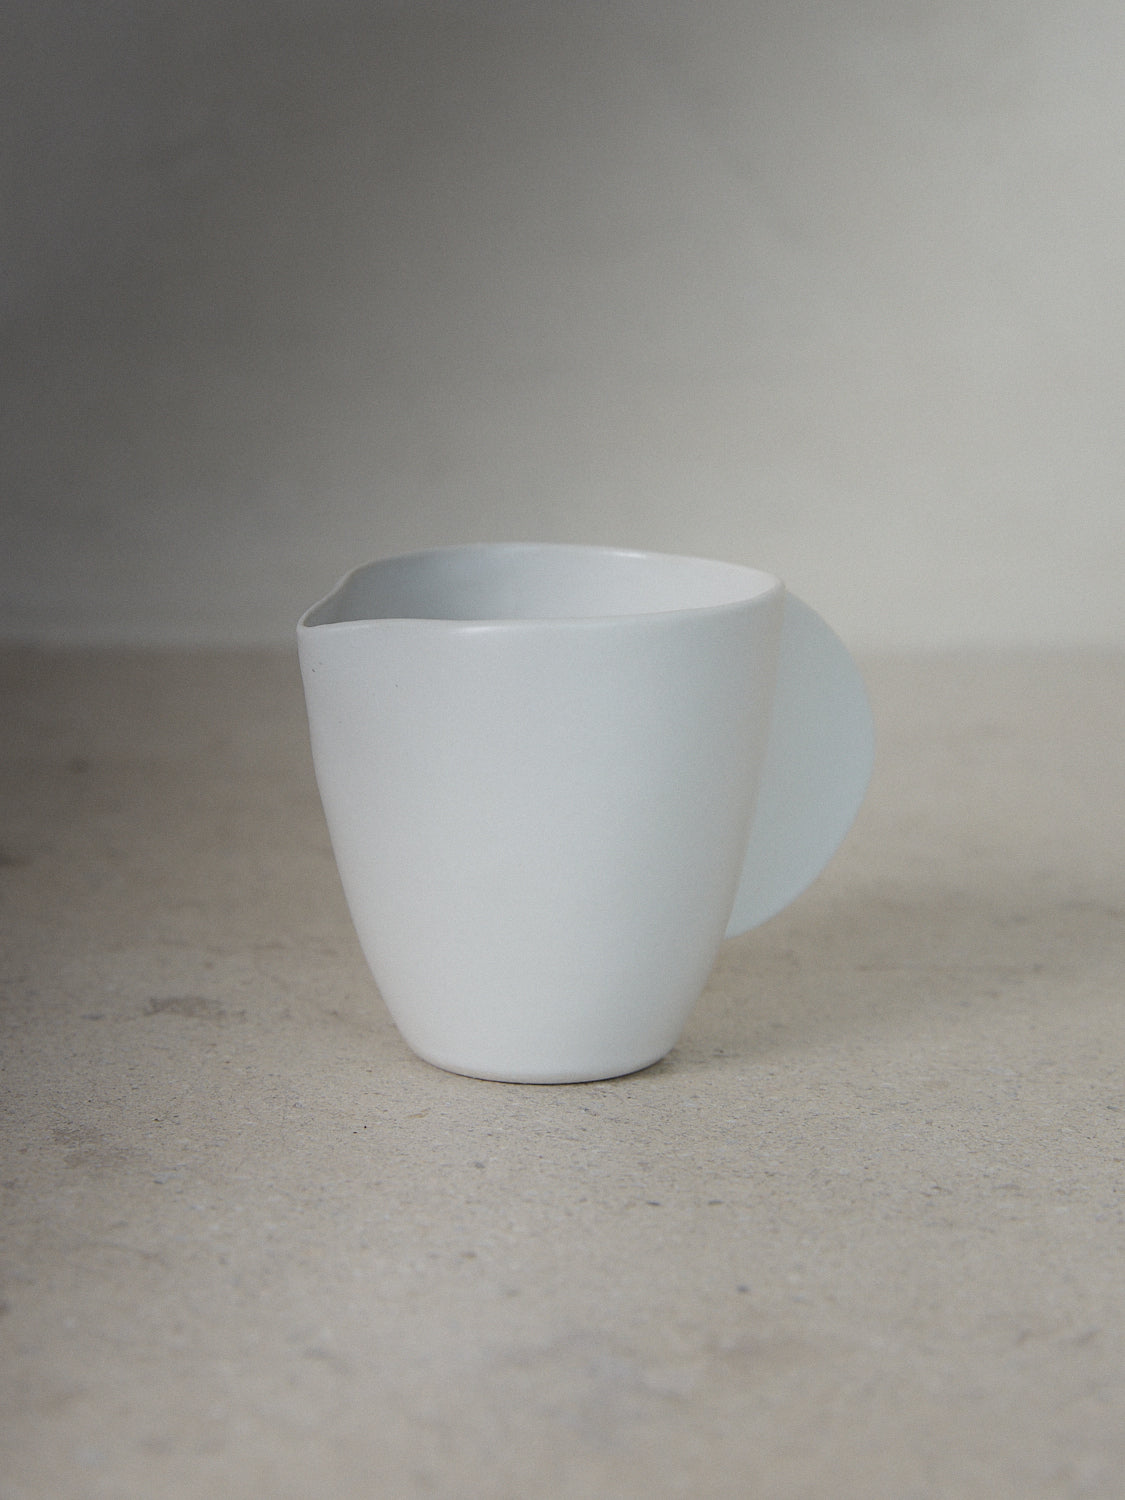 Raw Creamer. Exclusively ours. Hand sculpted coffee creamer jar with a pinched spout and solid, semicircle handle in matte, milky white stoneware.